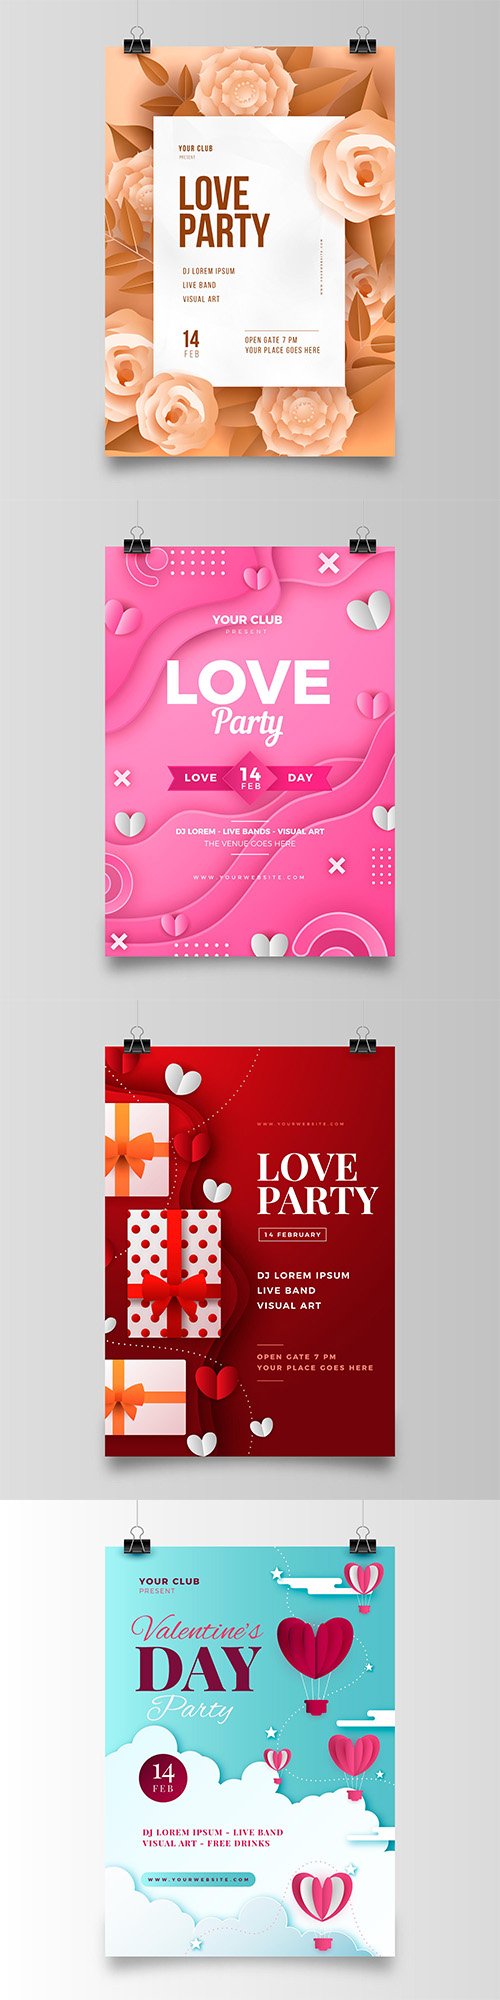 Valentines Day Party Flyer Template Collection